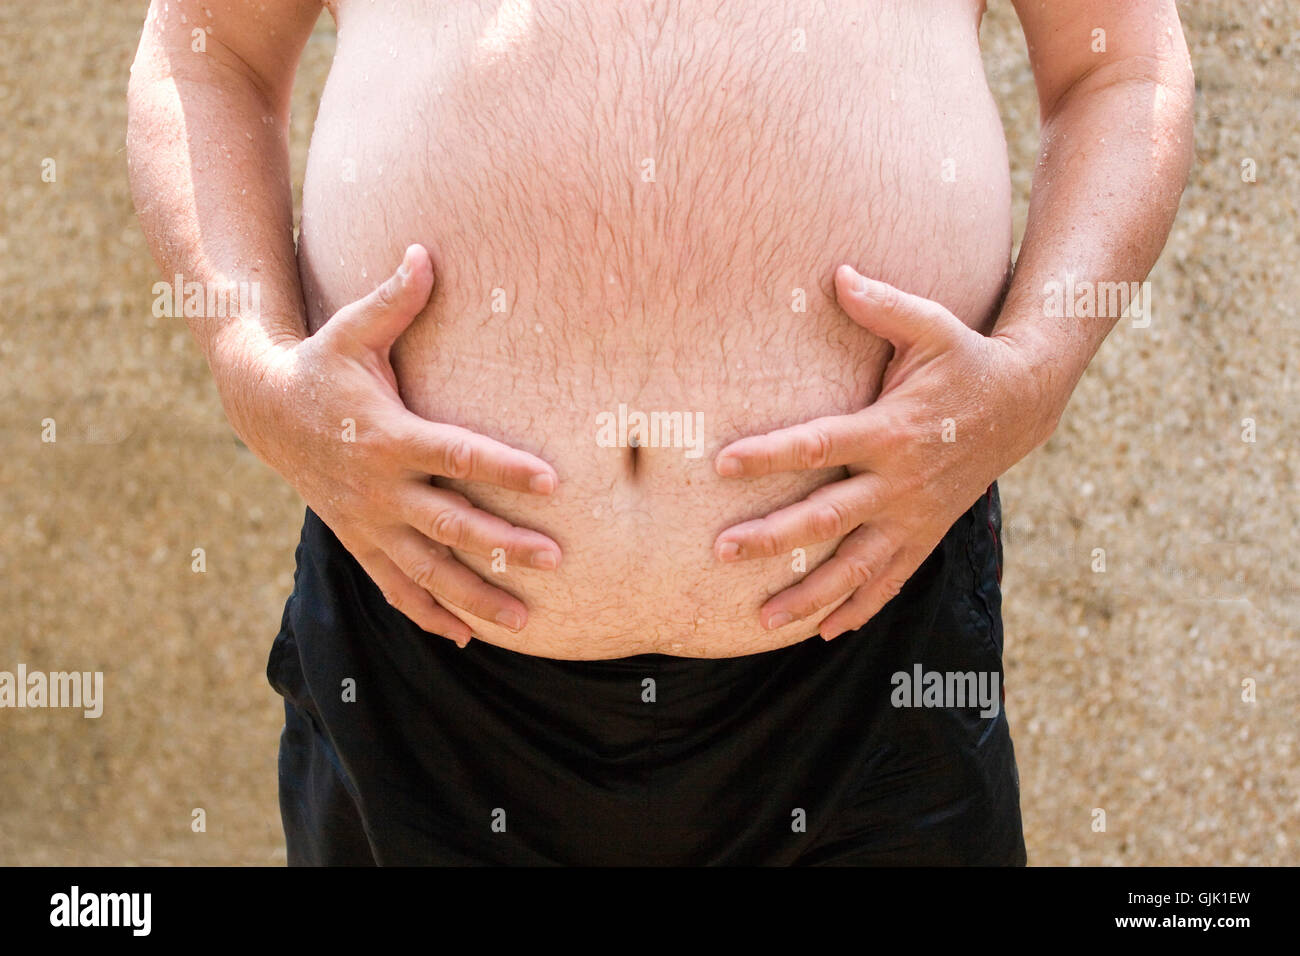 belly tummy overweight Stock Photo